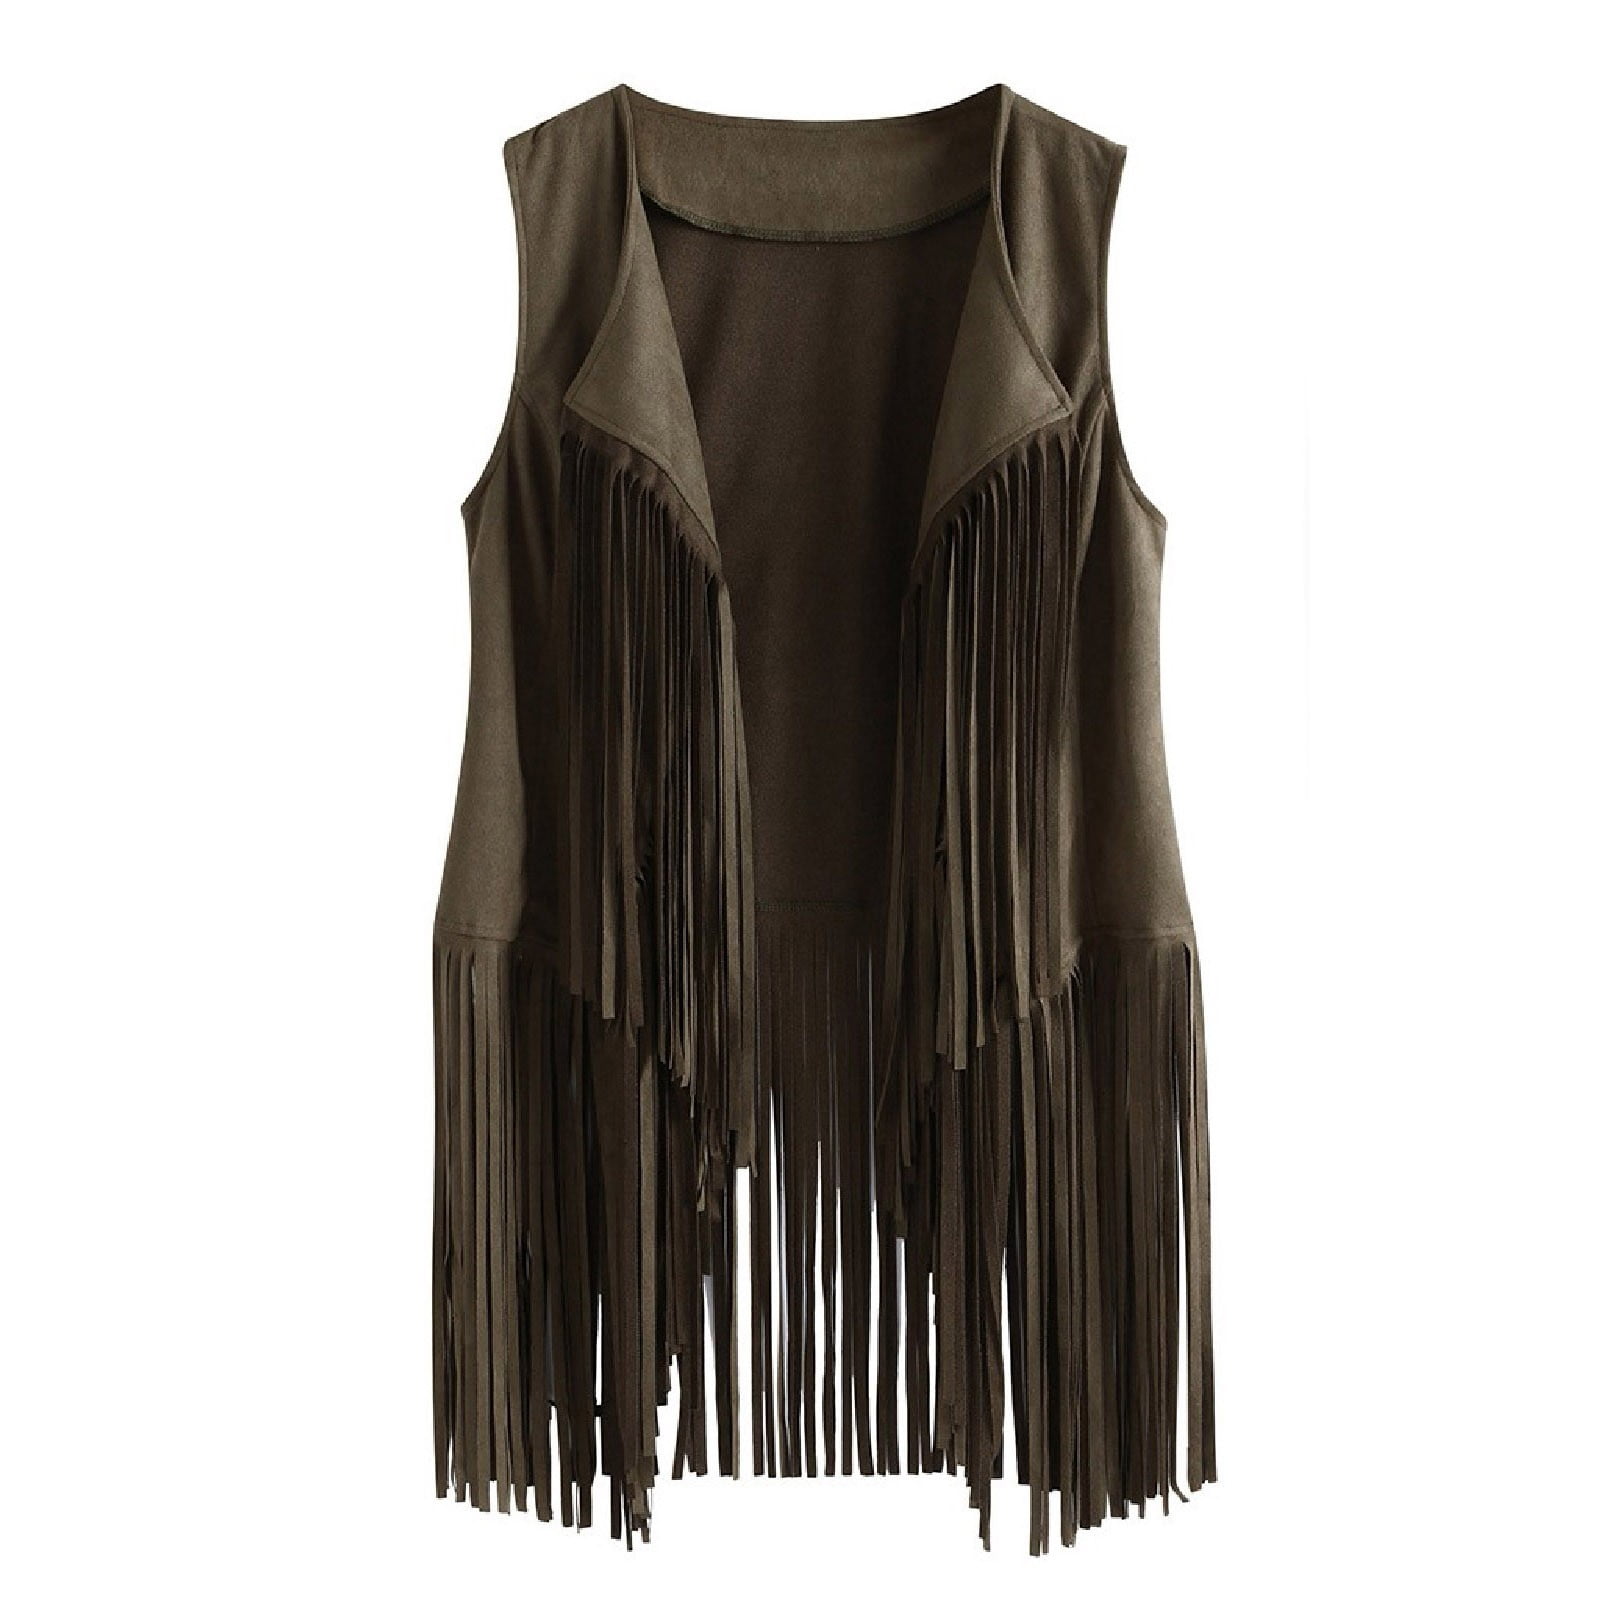 Moxiu Fringe Vests Cowgirl Outfits for Women Faux Suede Tassels 70s ...